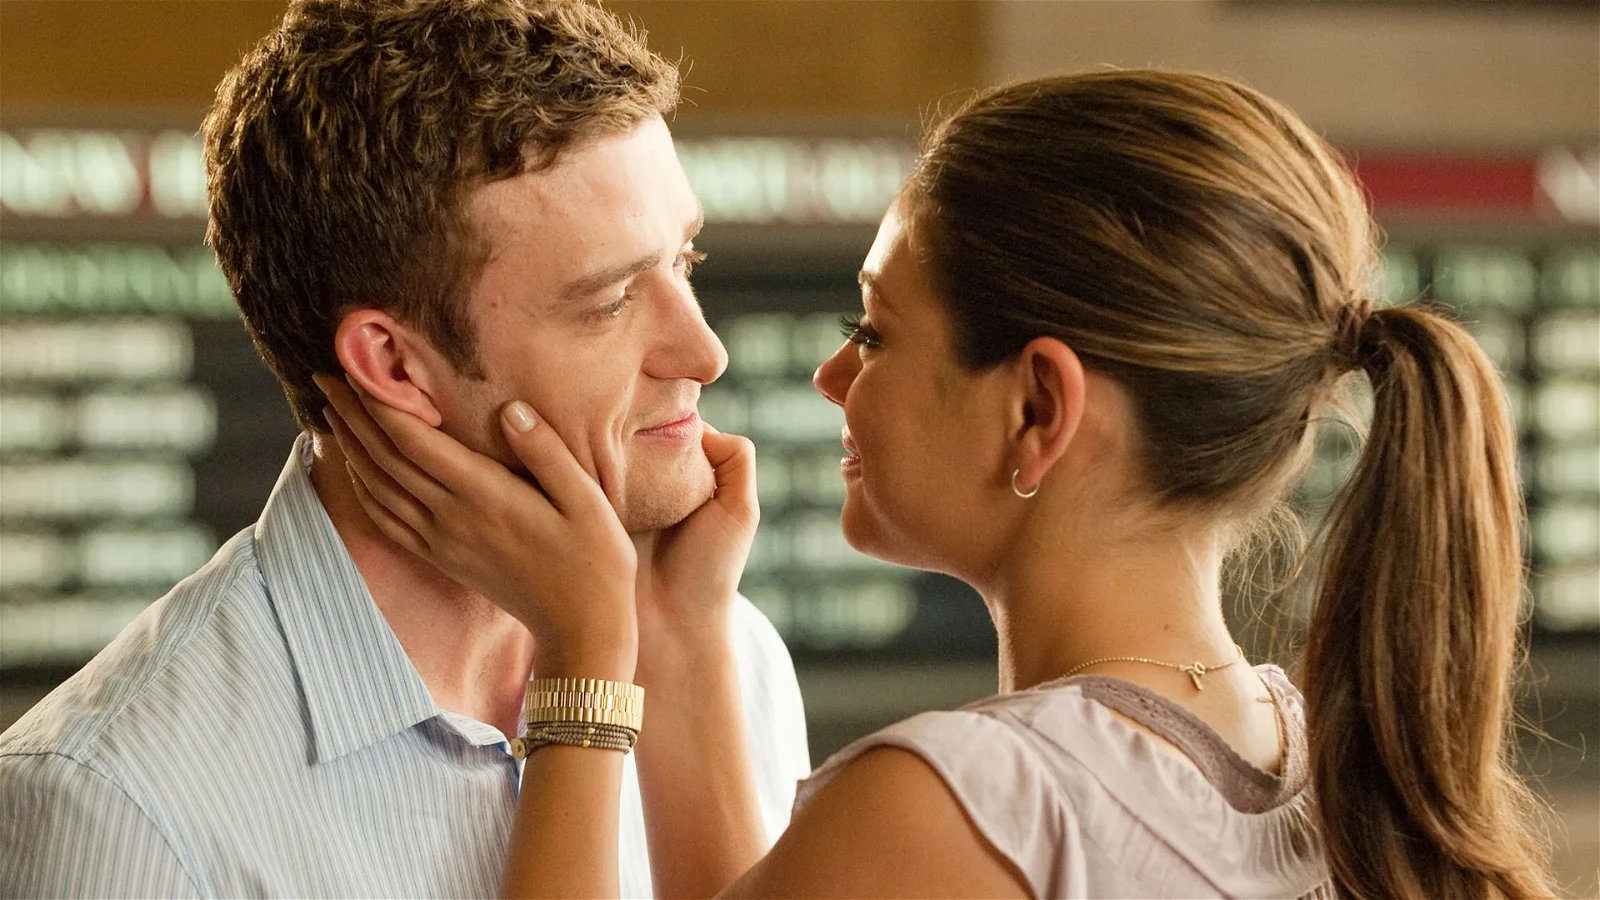 Justin Timberlake and Mila Kunis in Friends With Benefits (2011).